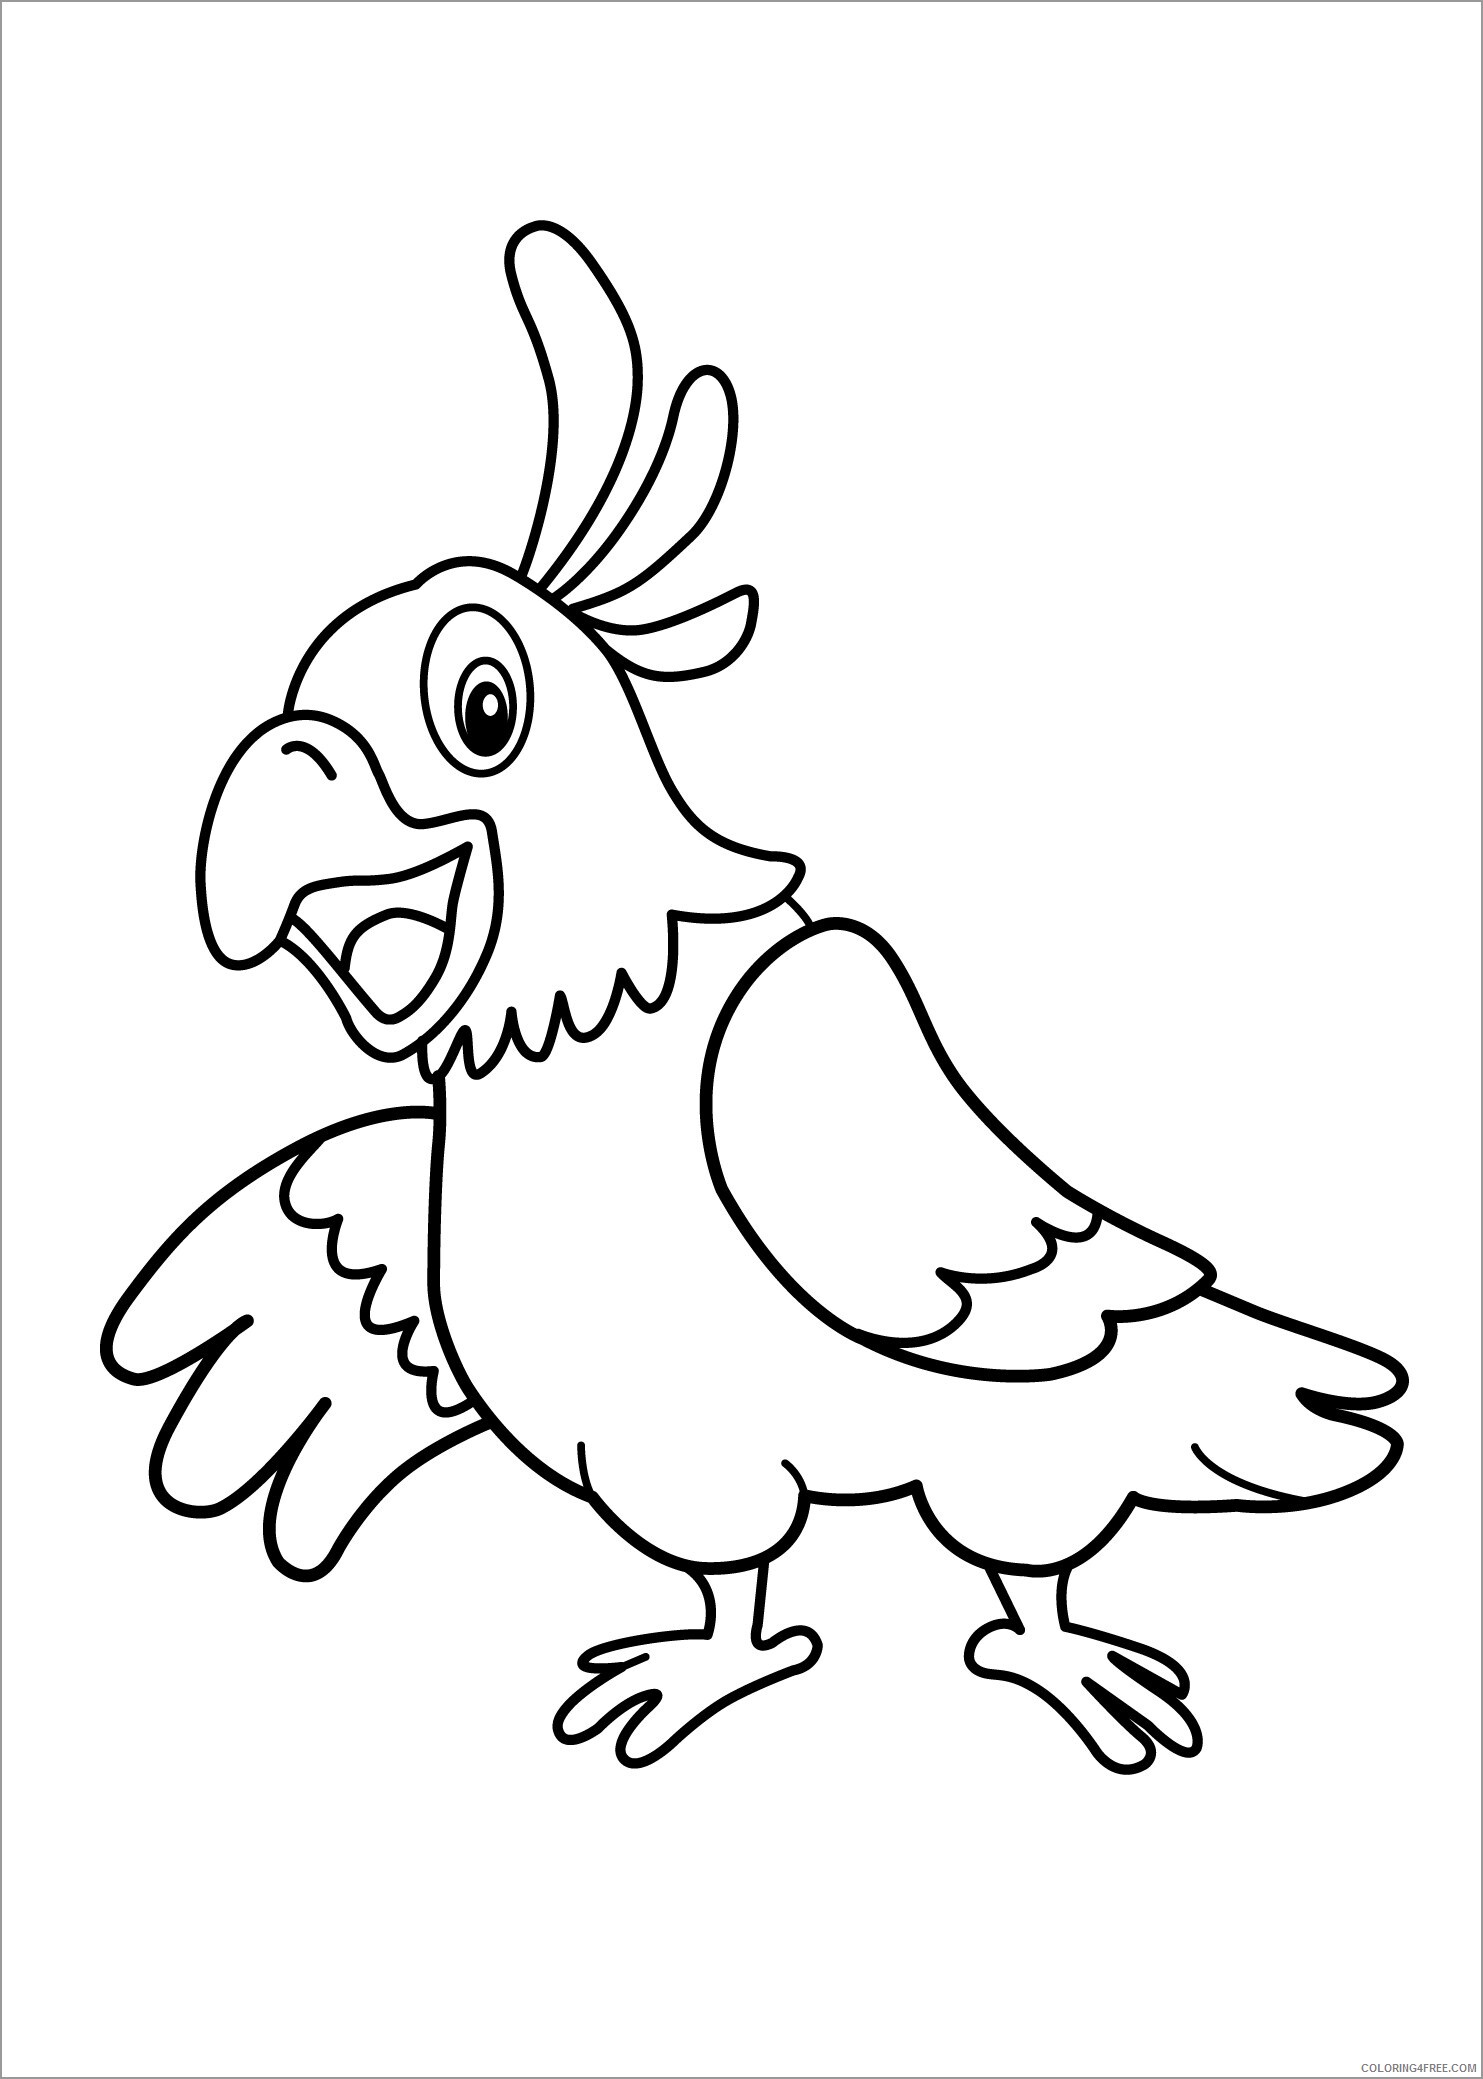 Parrot Coloring Pages Animal Printable Sheets cute parrot for kids 2021 3720 Coloring4free